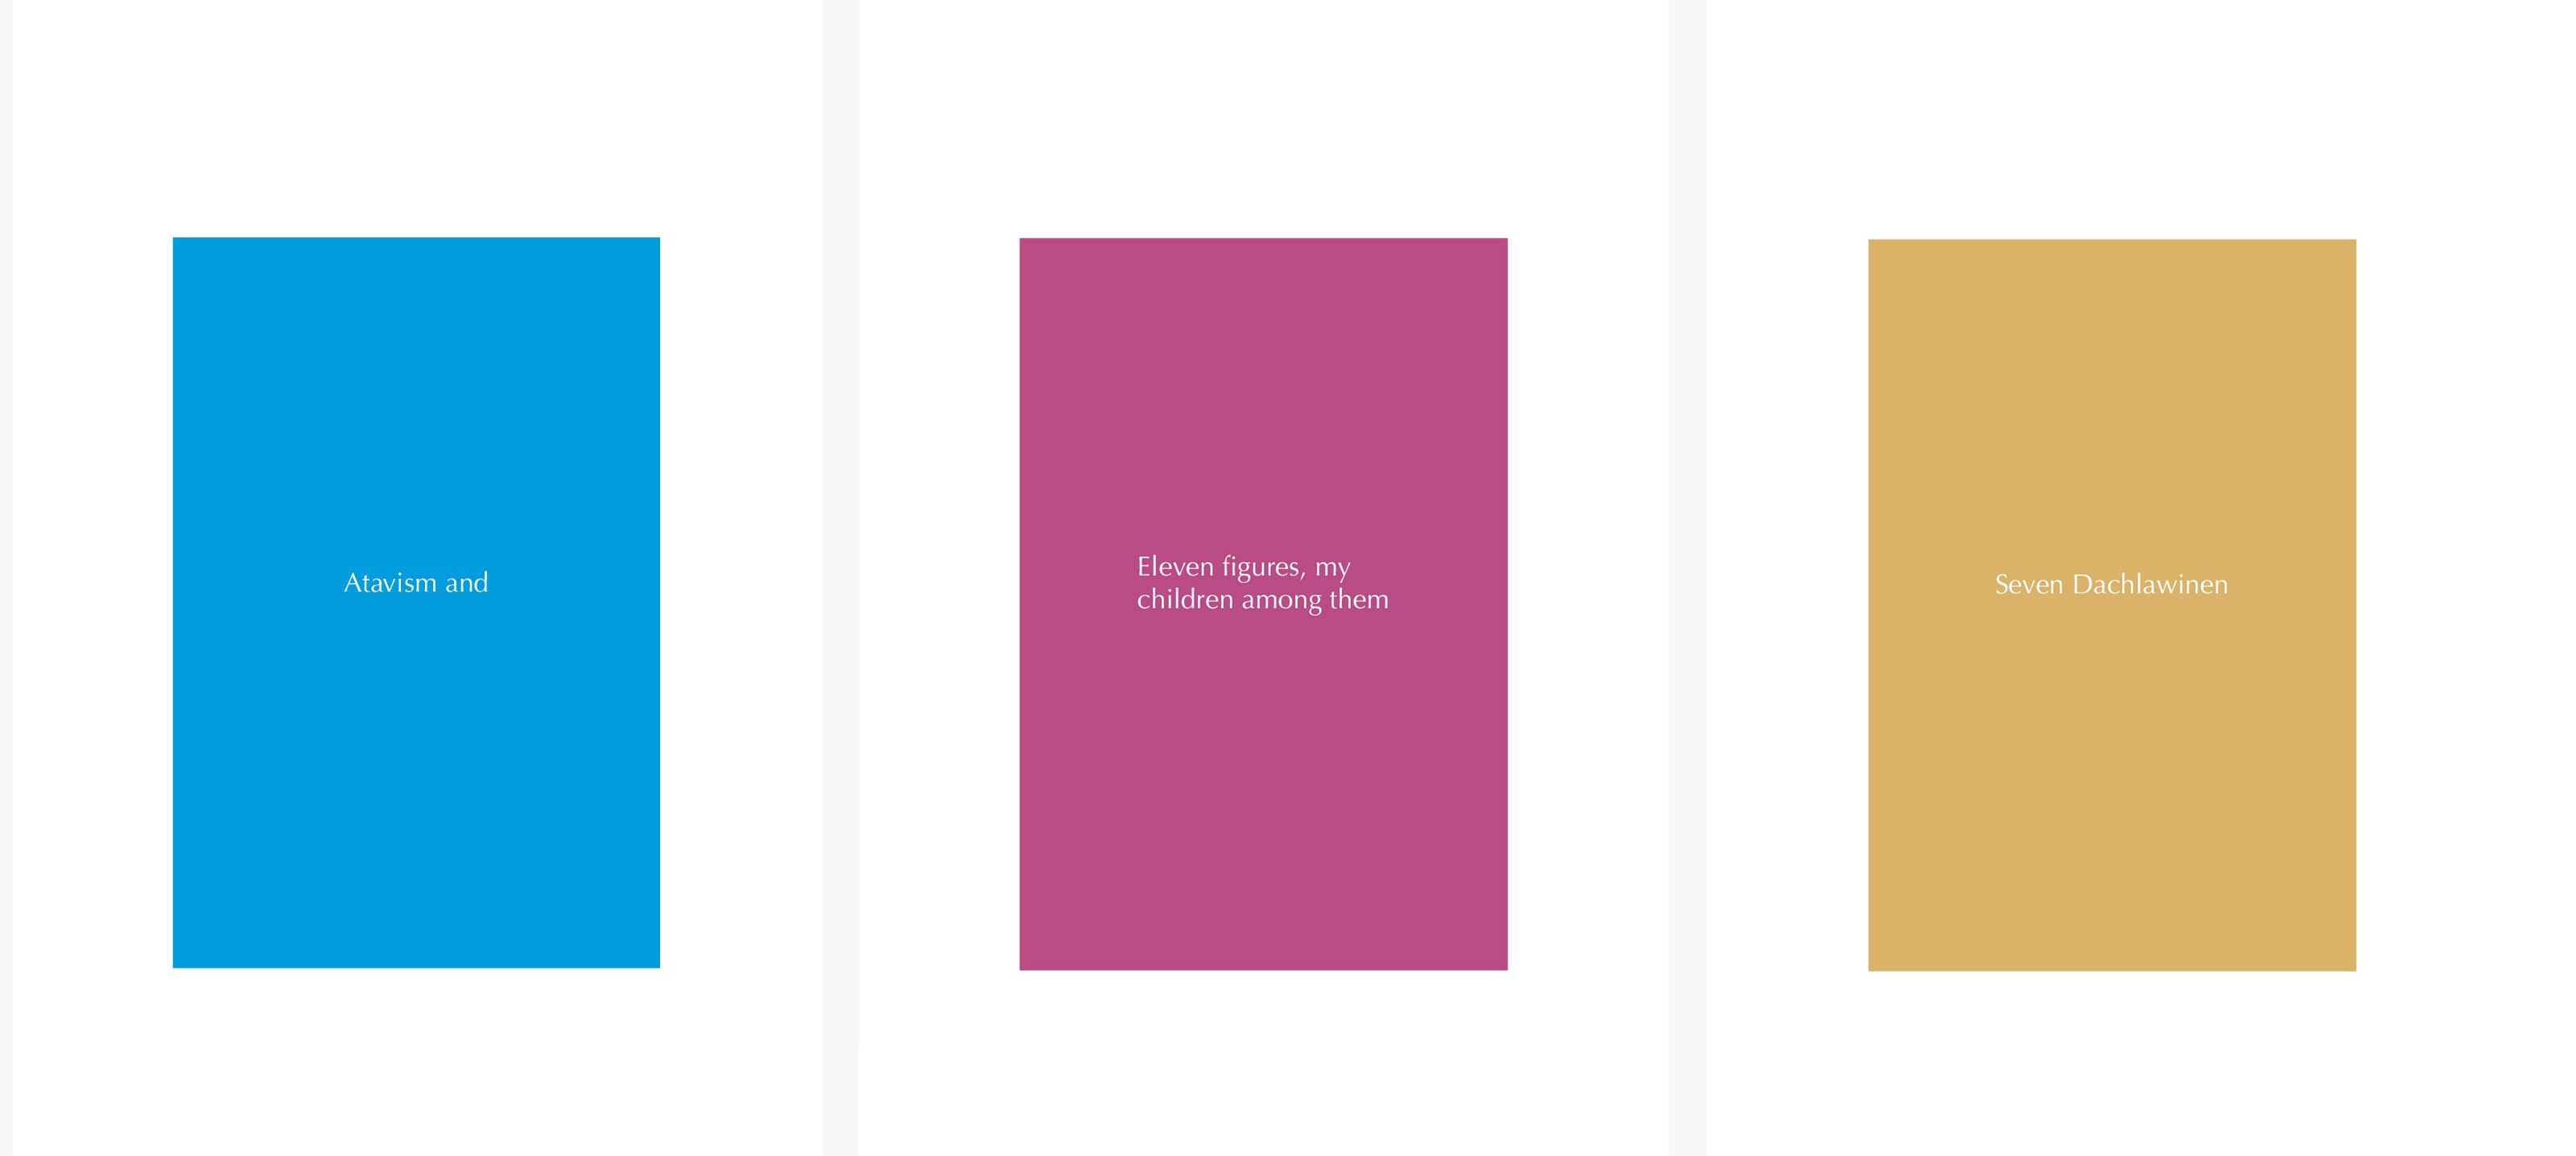 Three book covers showing a  coloured rectangles on which the three titles are displayed - Atavism and, Eleven figures, my children among them, Seven Dachlawhinen